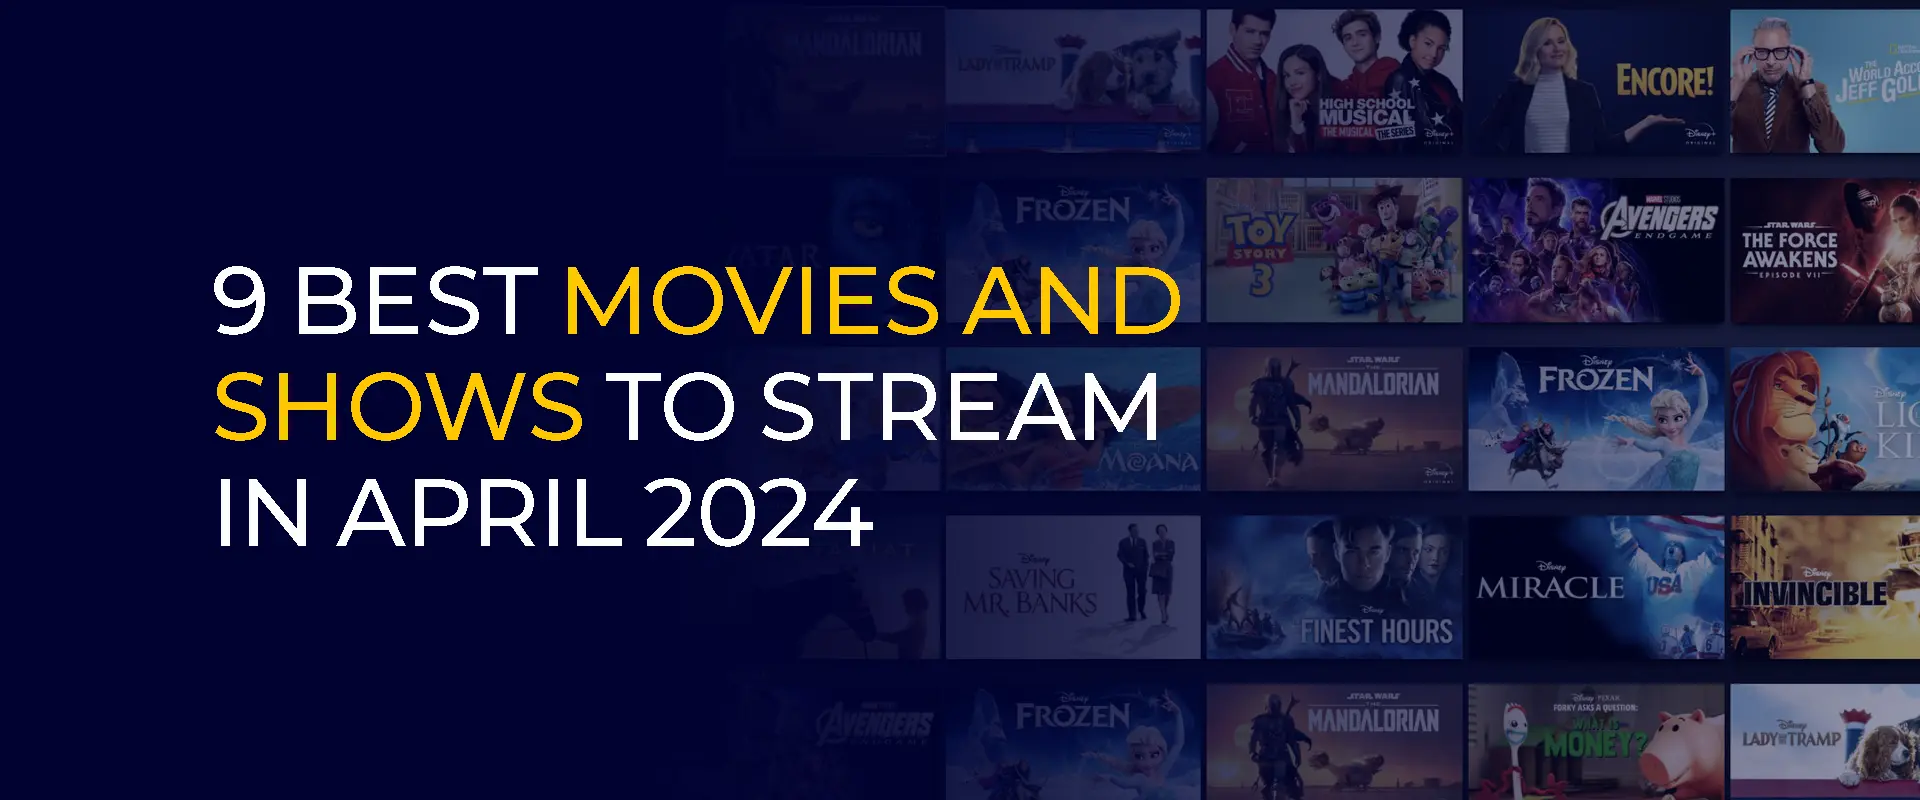 9 Best Movies and Shows to Stream in April 2024